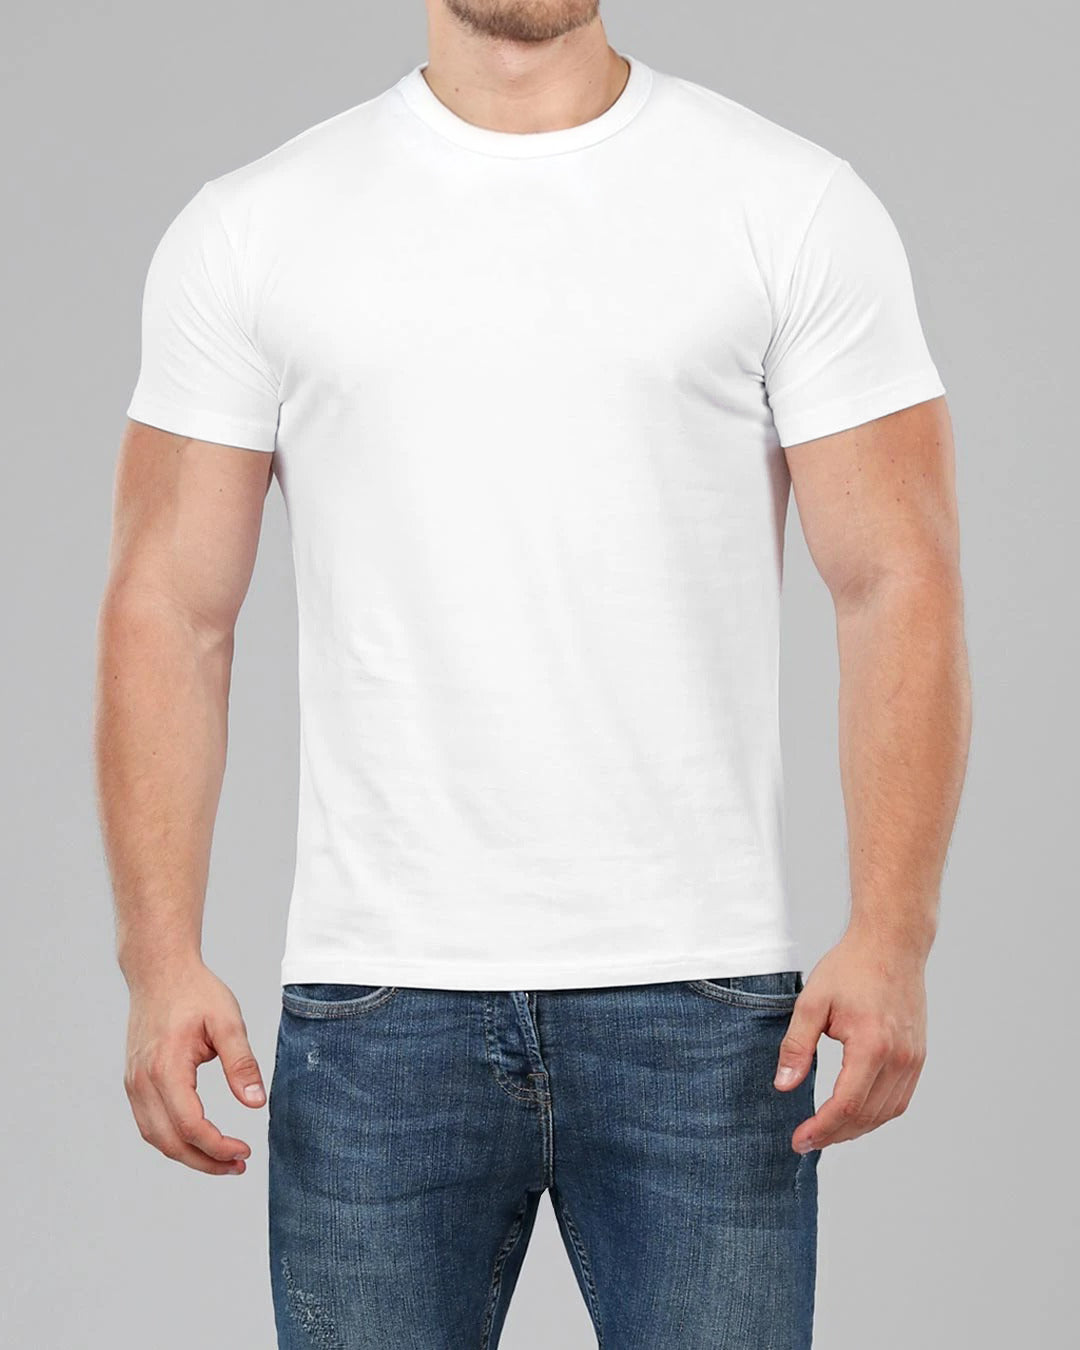 Bære Omhyggelig læsning Rejse Men's White Crew Neck Fitted Plain T-Shirt | Muscle Fit Basics